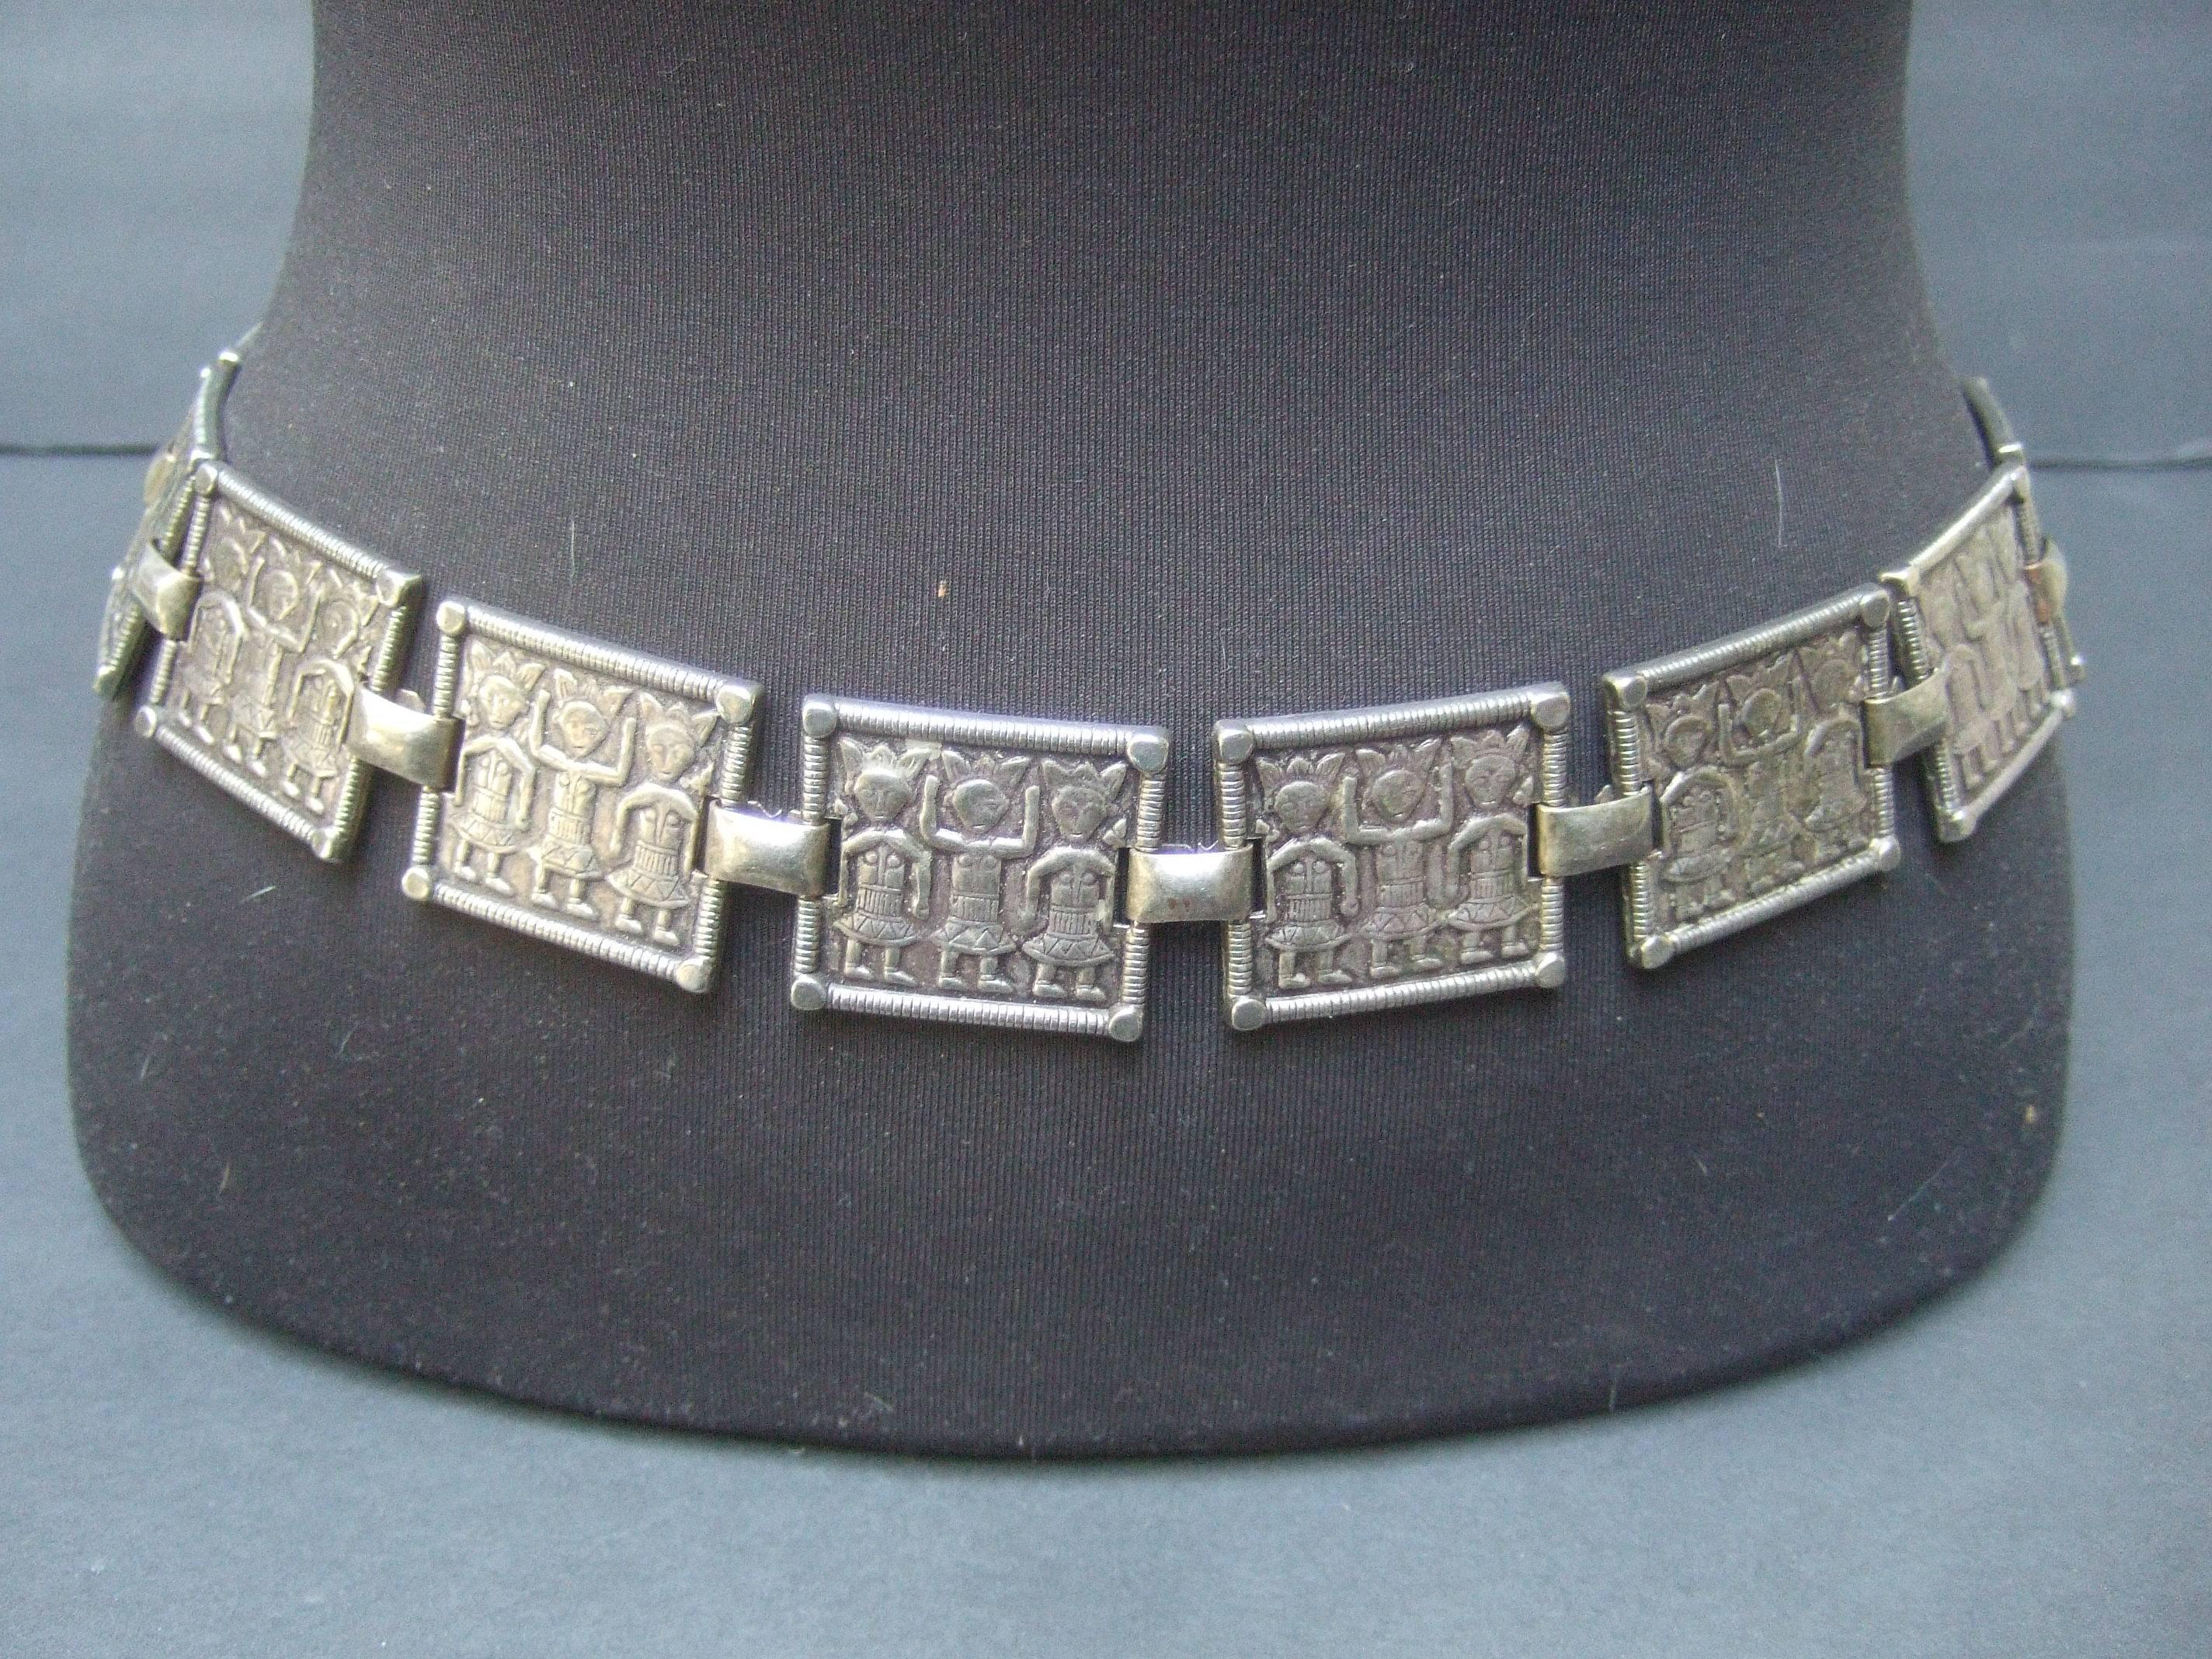 Exotic tribal figure pewter tone metal link belt c 1970s
The unique belt is designed with a series 
of hinged square metal tiles

Each link depicts a trio of tribal warrior figures
The series of pewter tone metal links are solid
and